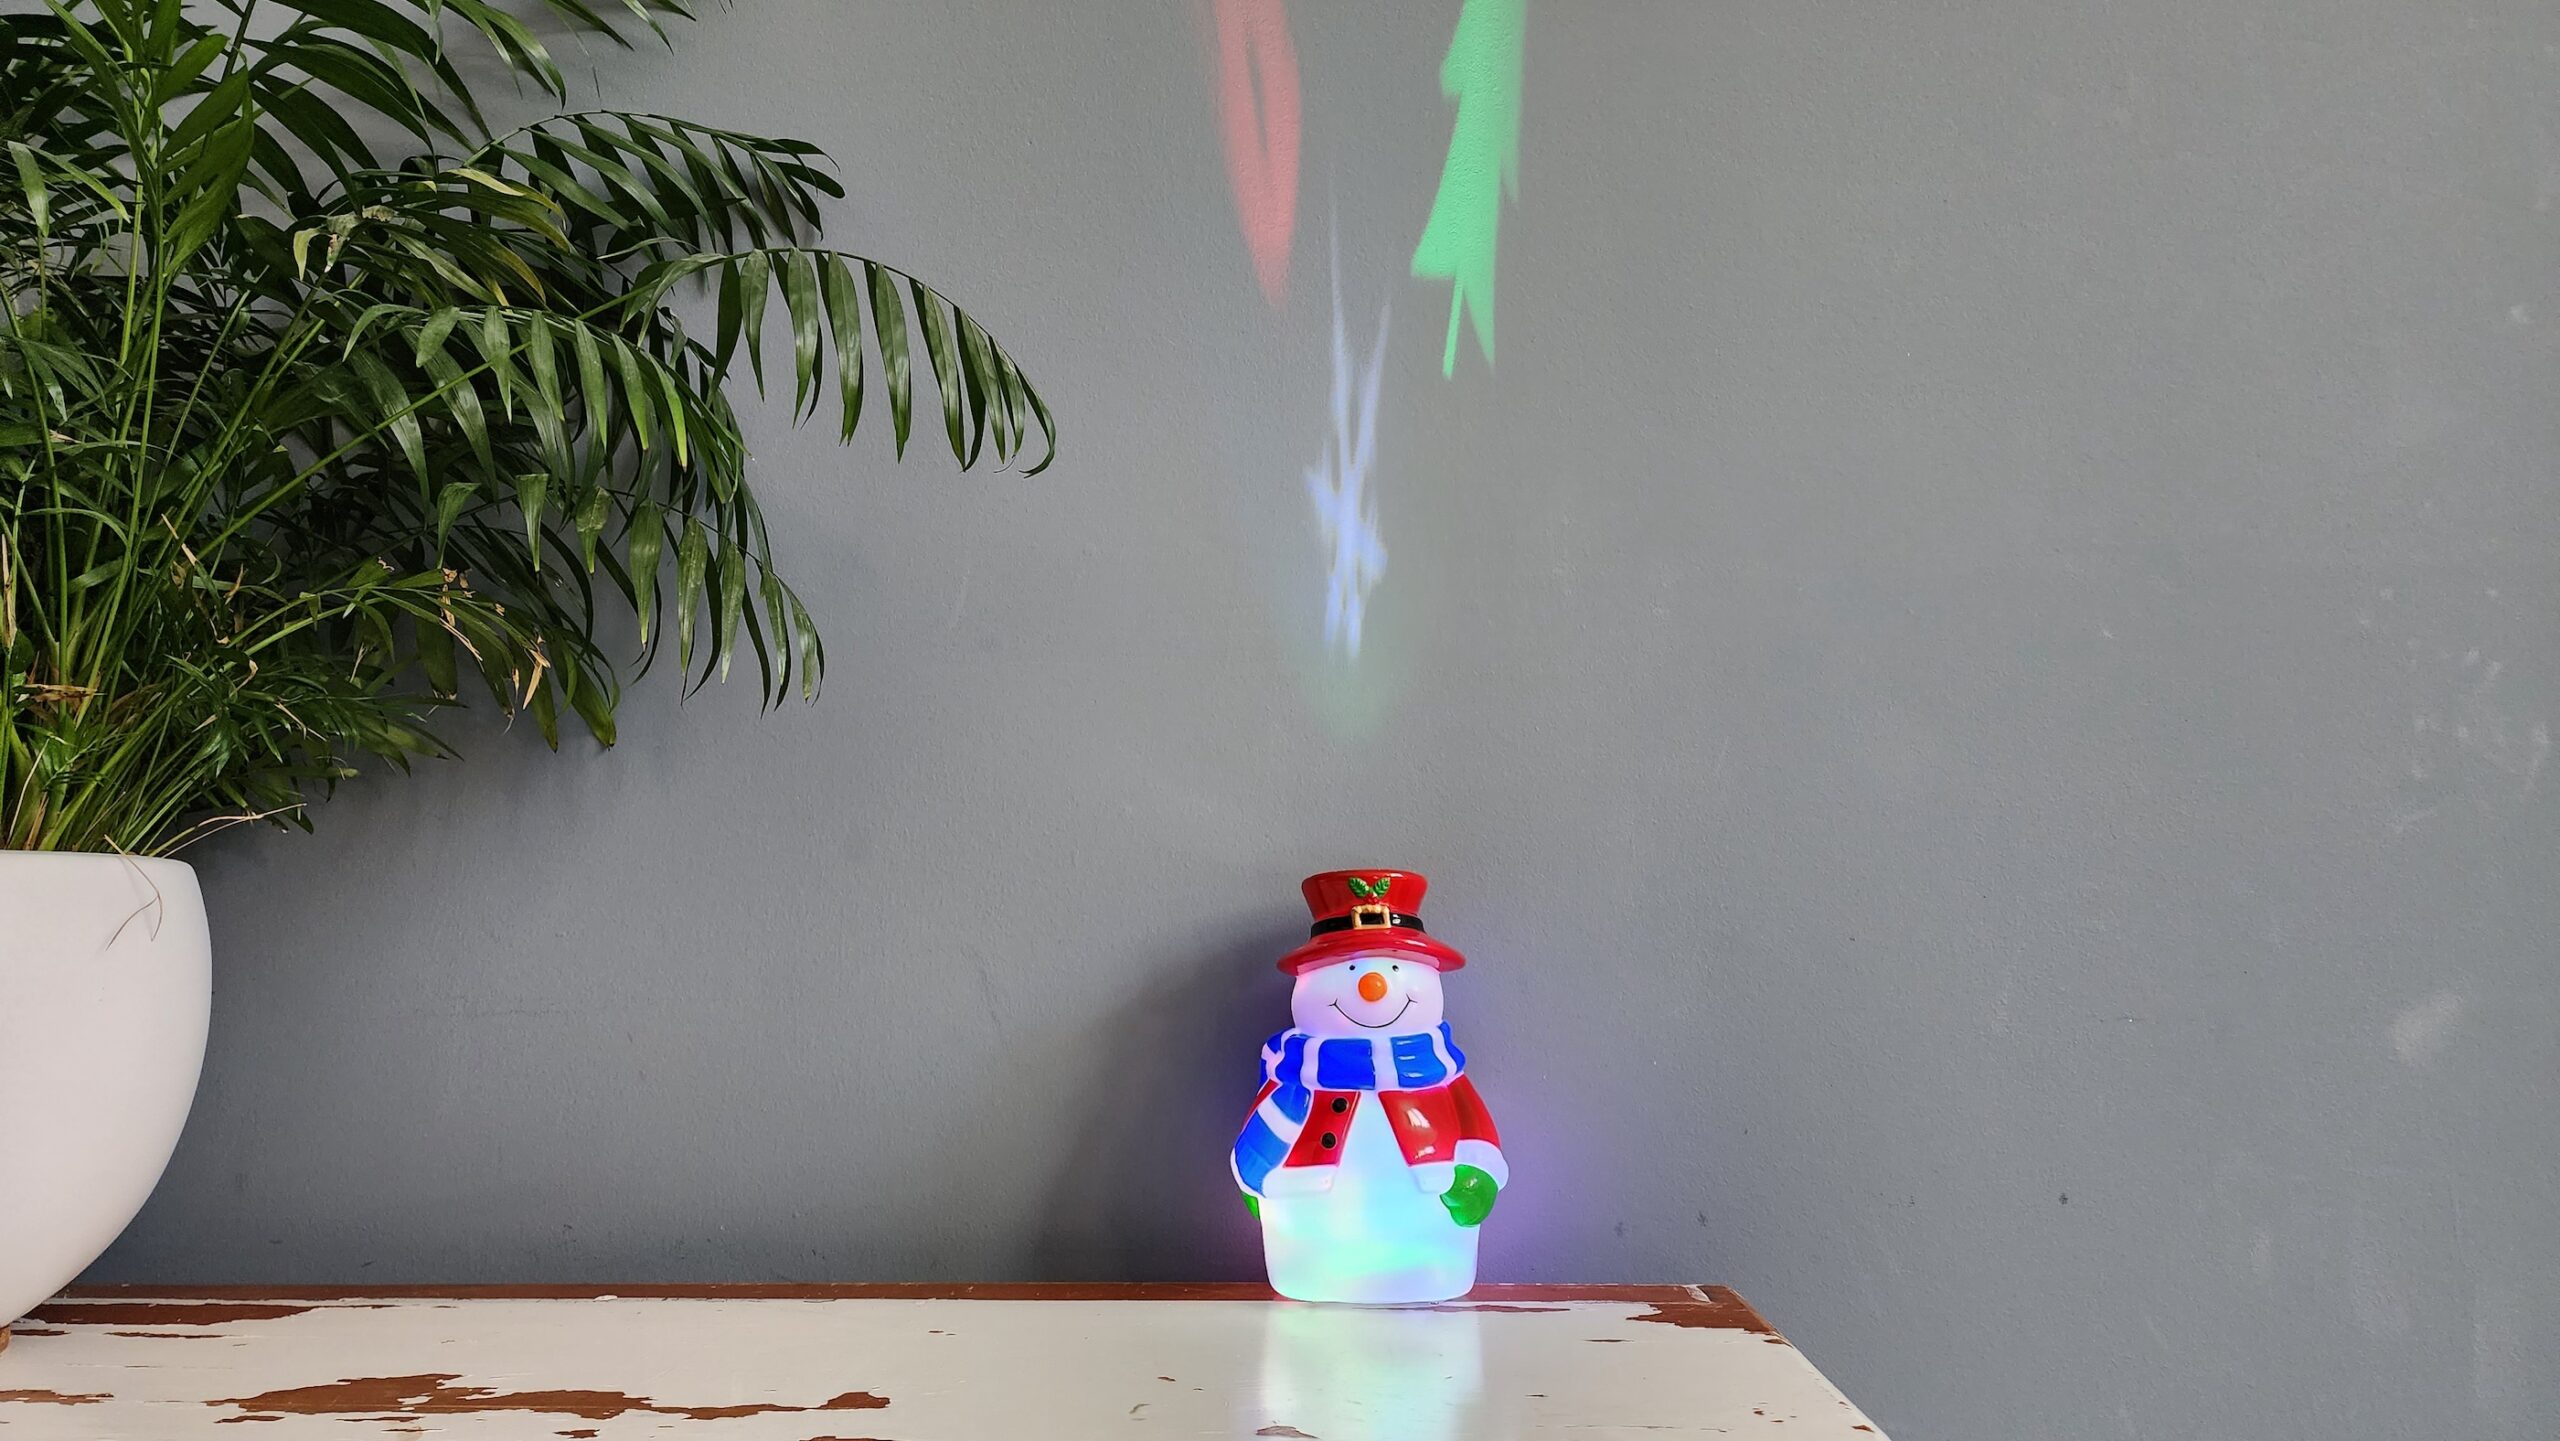 The Yocuby Snowman Christmas Light Projector on an antique table and projecting a red, blue, and green holiday scene onto the wall above.